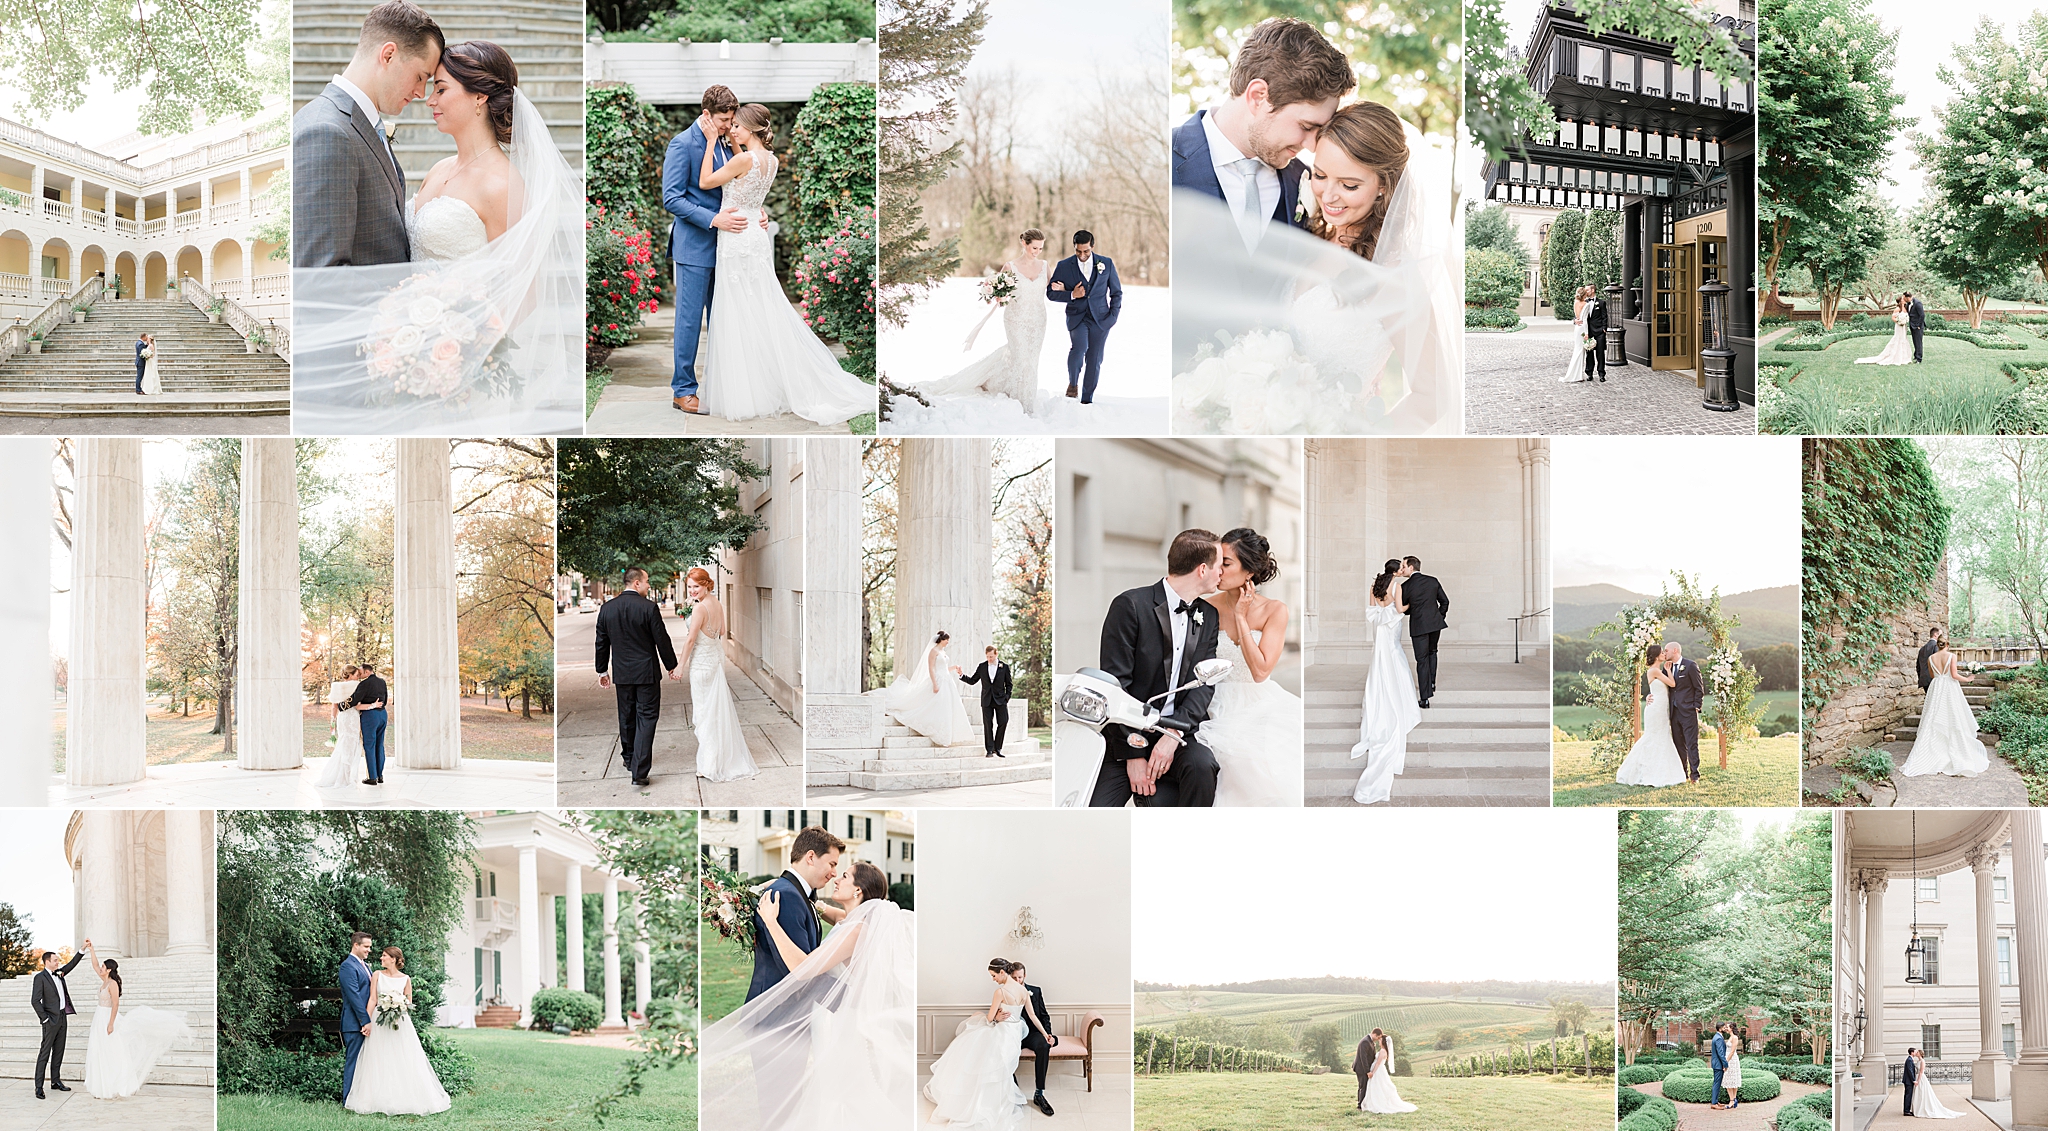 To wrap up the 2018 season, this Washington, DC wedding photographer is sharing superlatives from the most stunning affairs of the year!